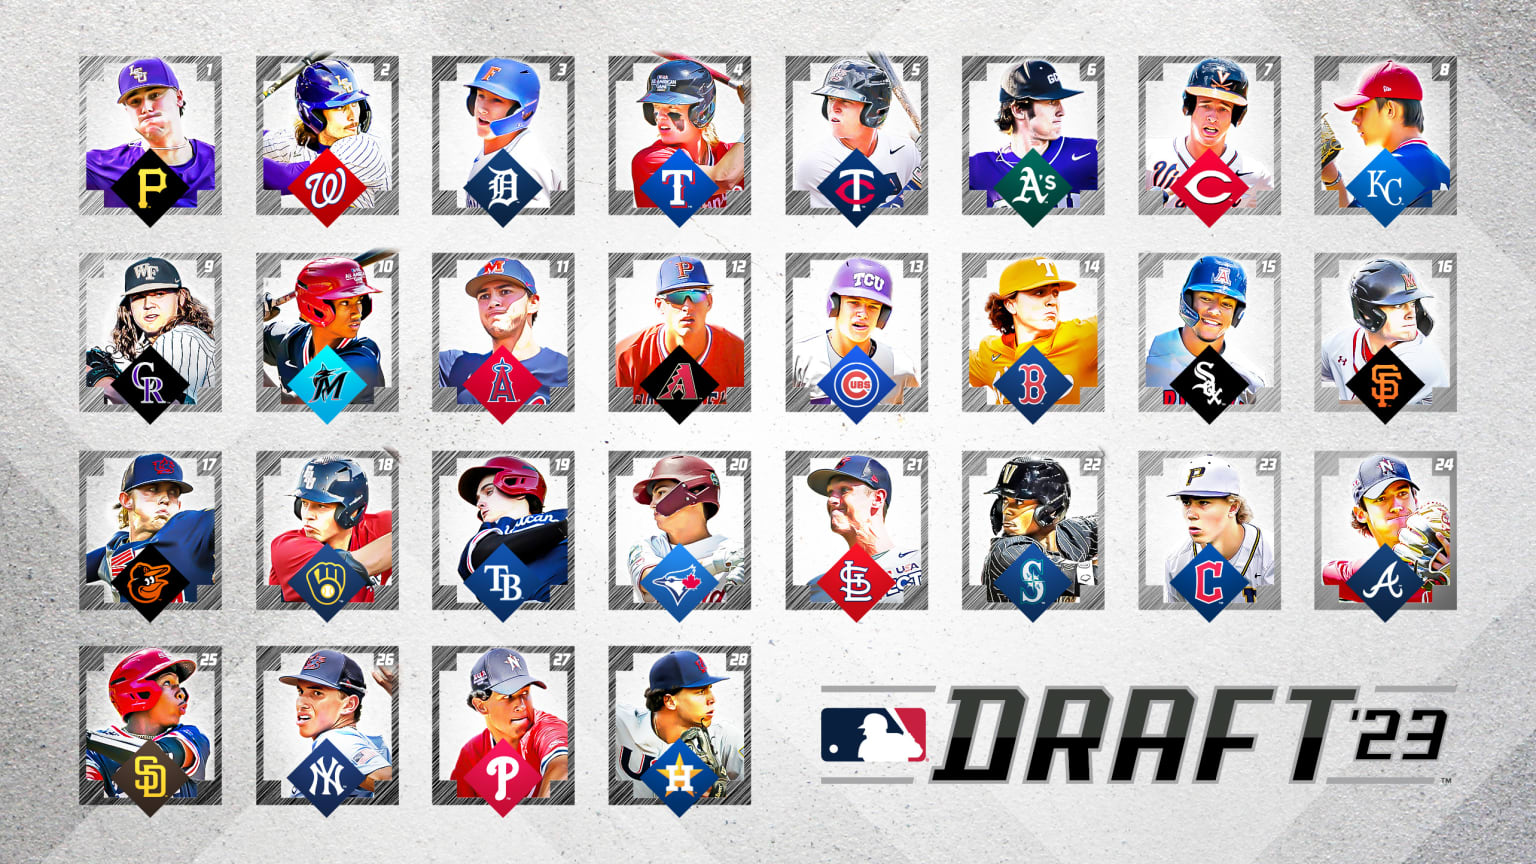 A grid showing 28 Draft prospects paired with MLB team logos